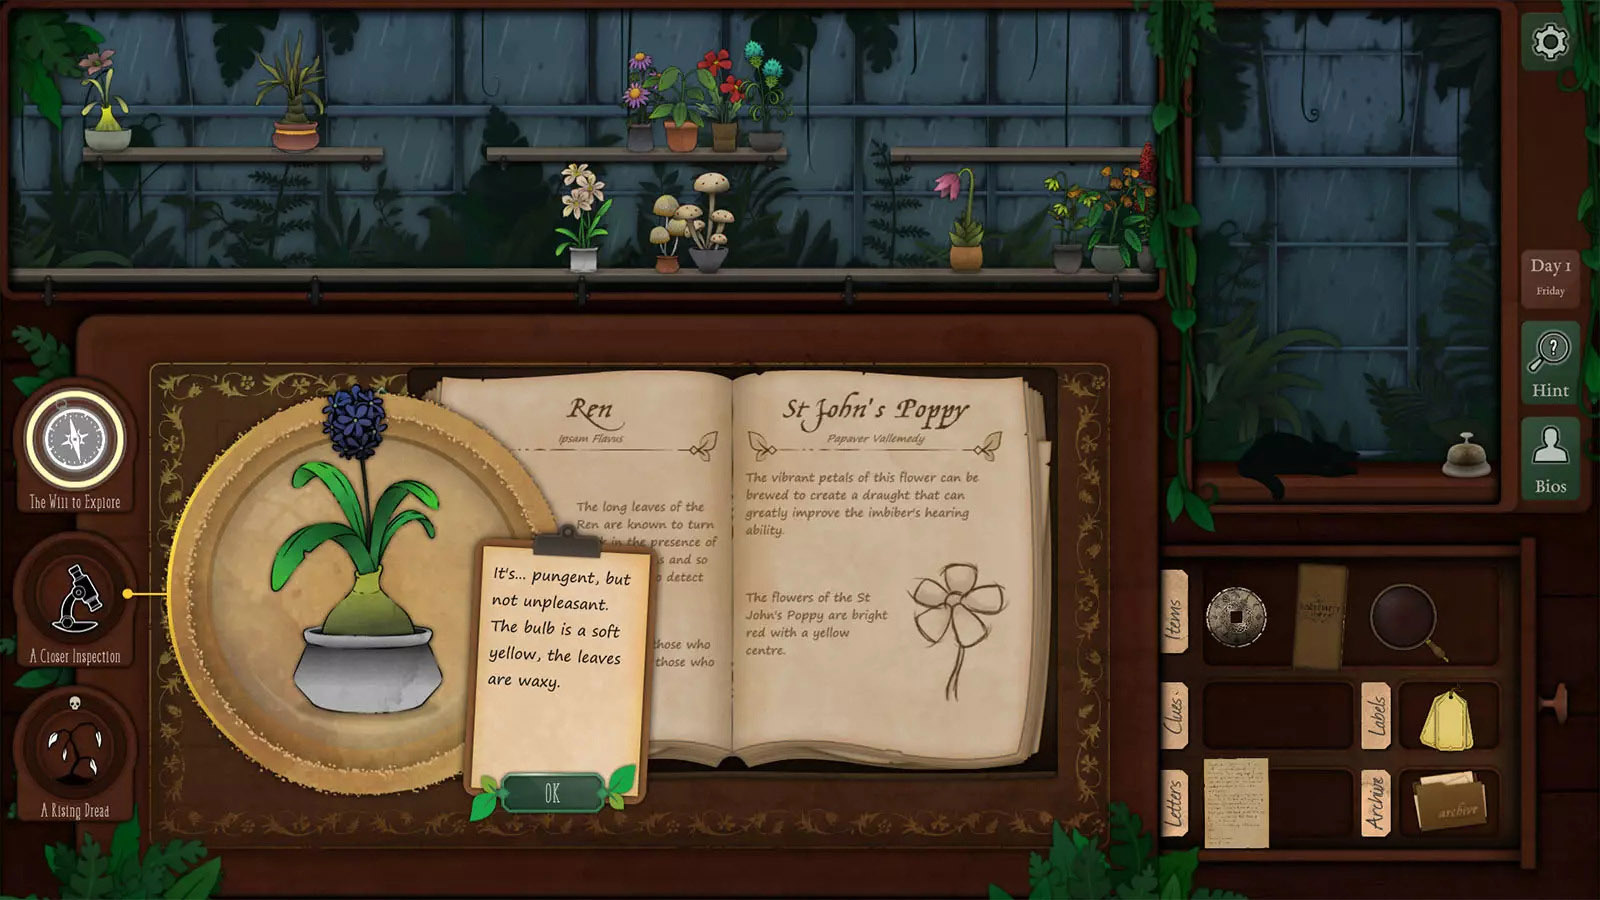 A video game screenshot of different flowers and plants on a shelf, with a book showing text describing them.